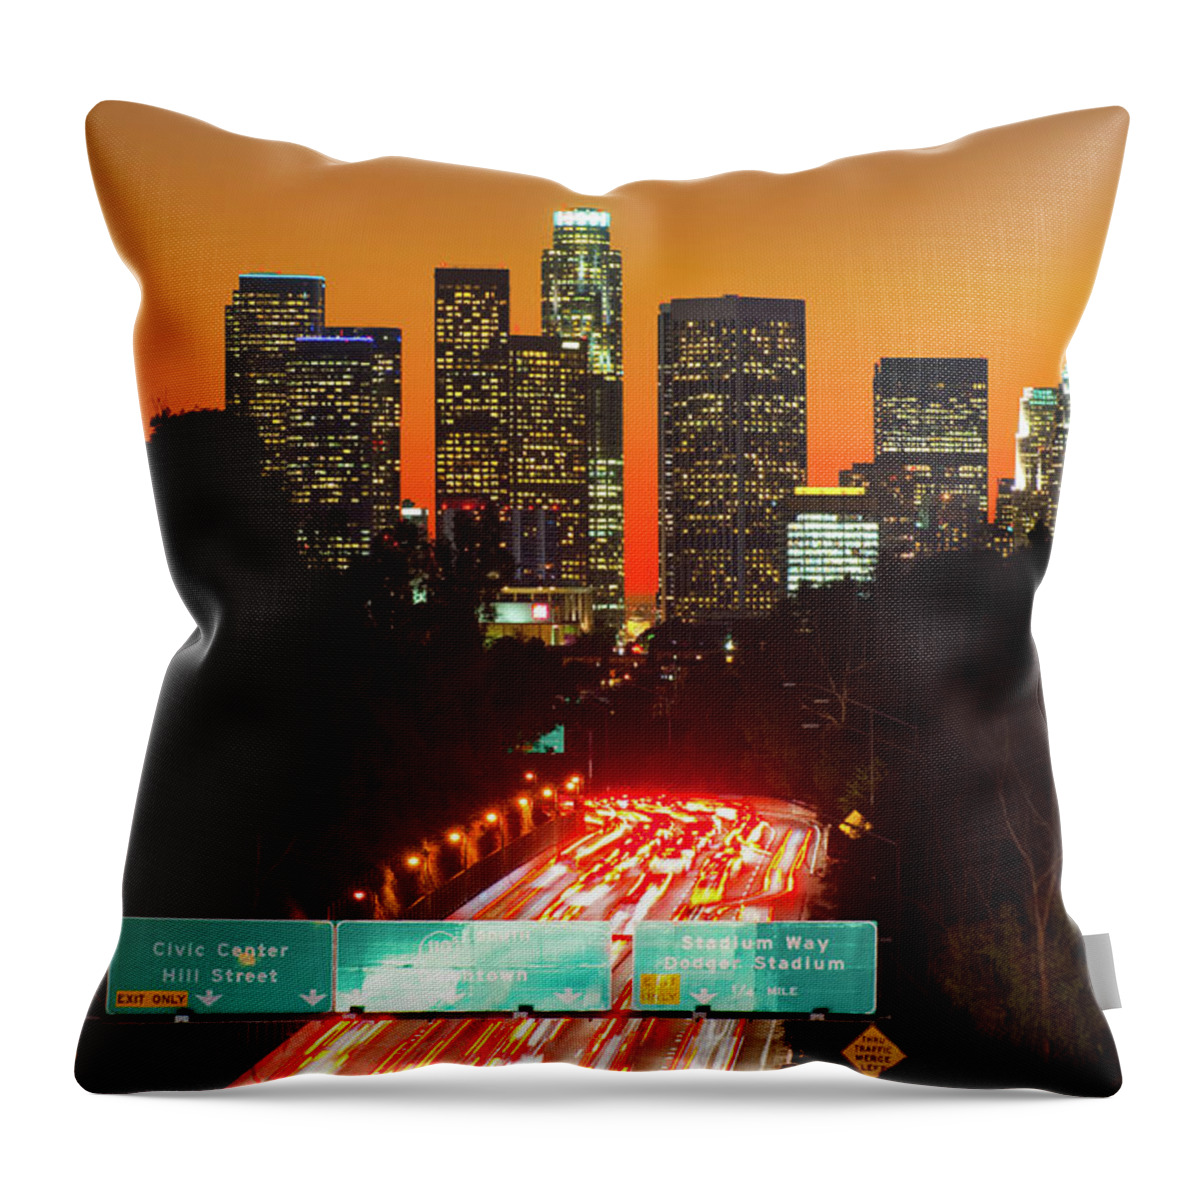 Orange Color Throw Pillow featuring the photograph Los Angeles Skyline At Sunset And by Davel5957